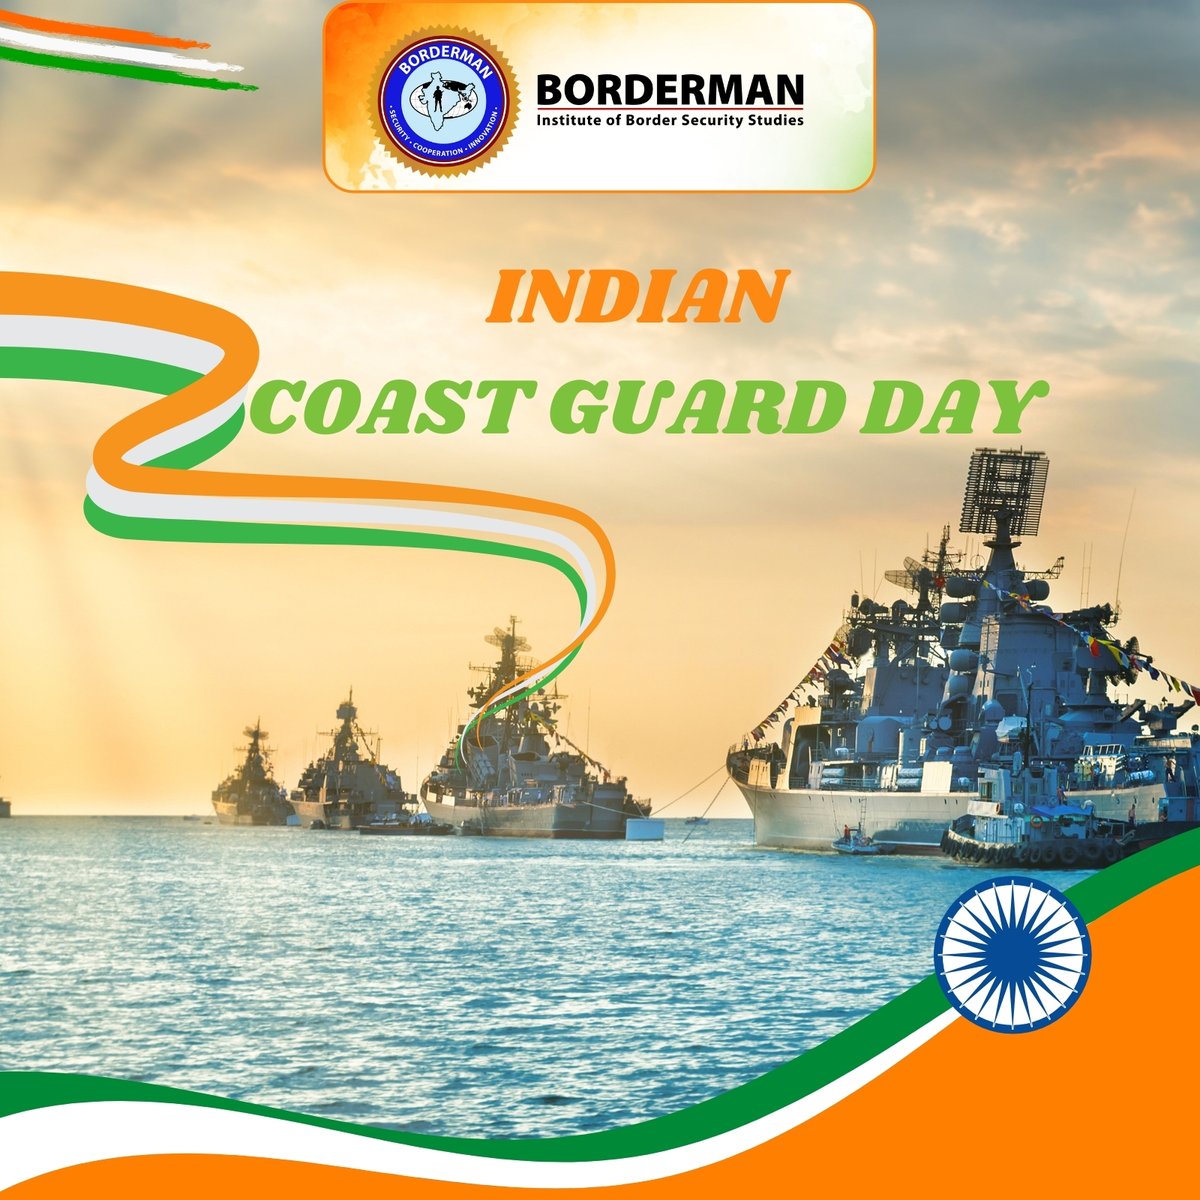 Saluting the guardians of our shores on Indian Coast Guard Day! 🇮🇳⚓️ From safeguarding our seas to ensuring maritime security, their dedication is unwavering. 

#Borderman #border #india #India #security #IndianCoastGuardDay #ProudToProtect